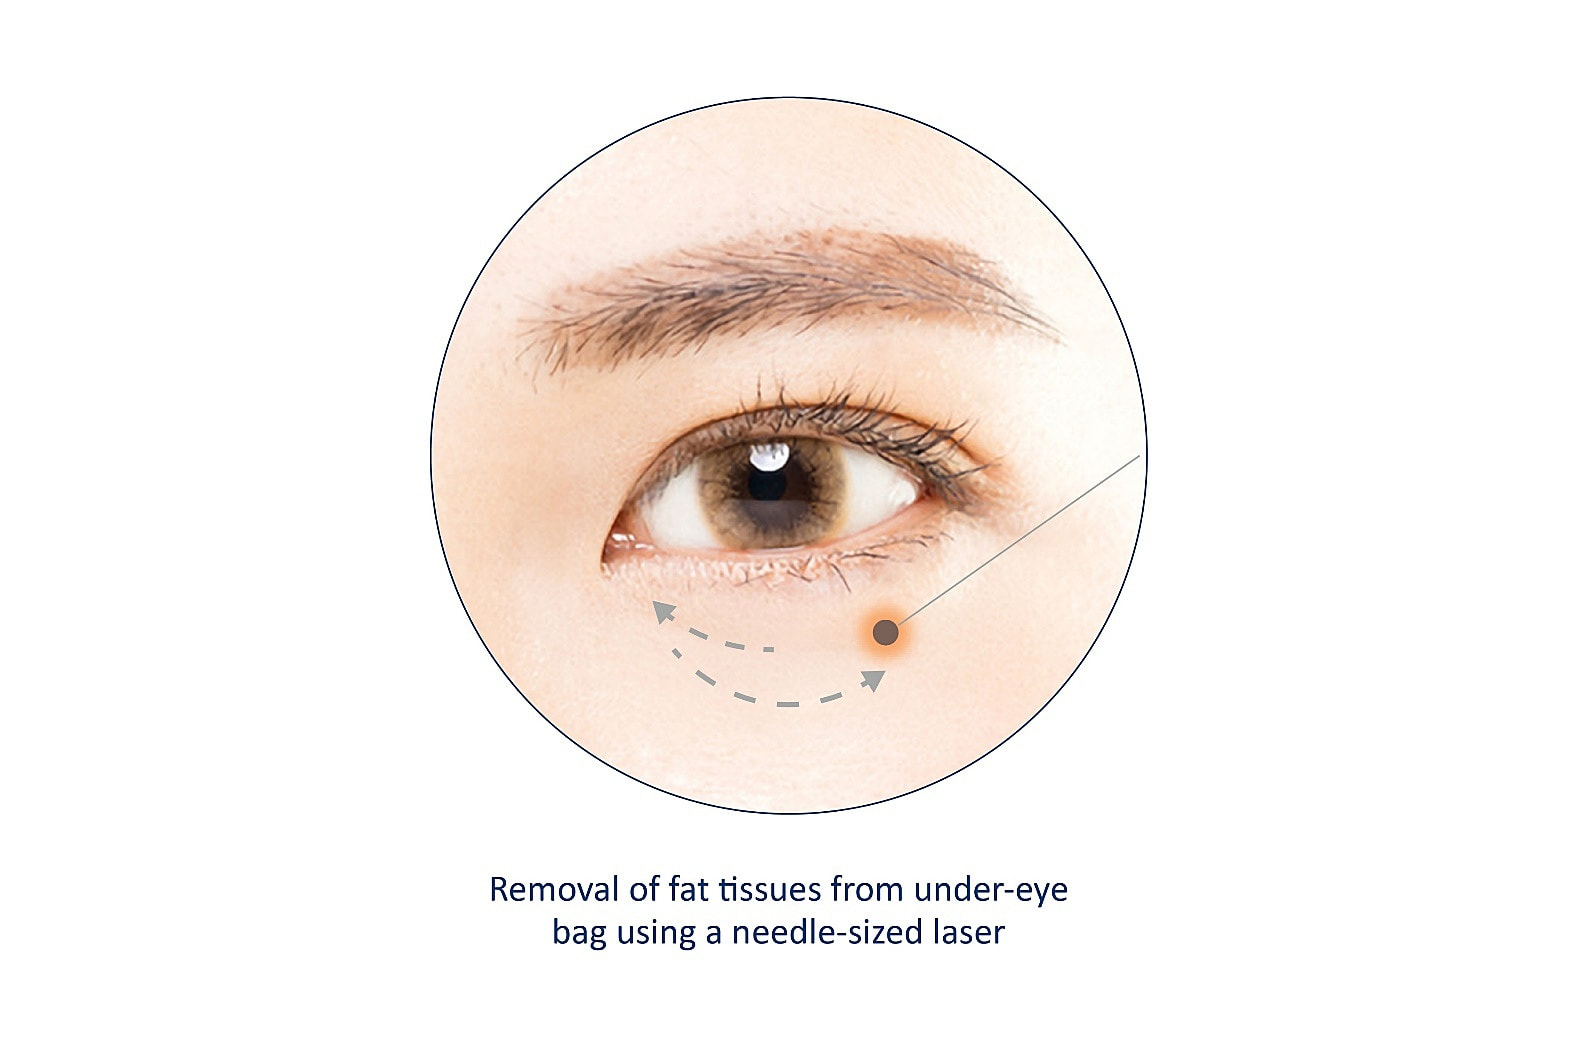 Non-Surgical Eye Bag Removal in Singapore